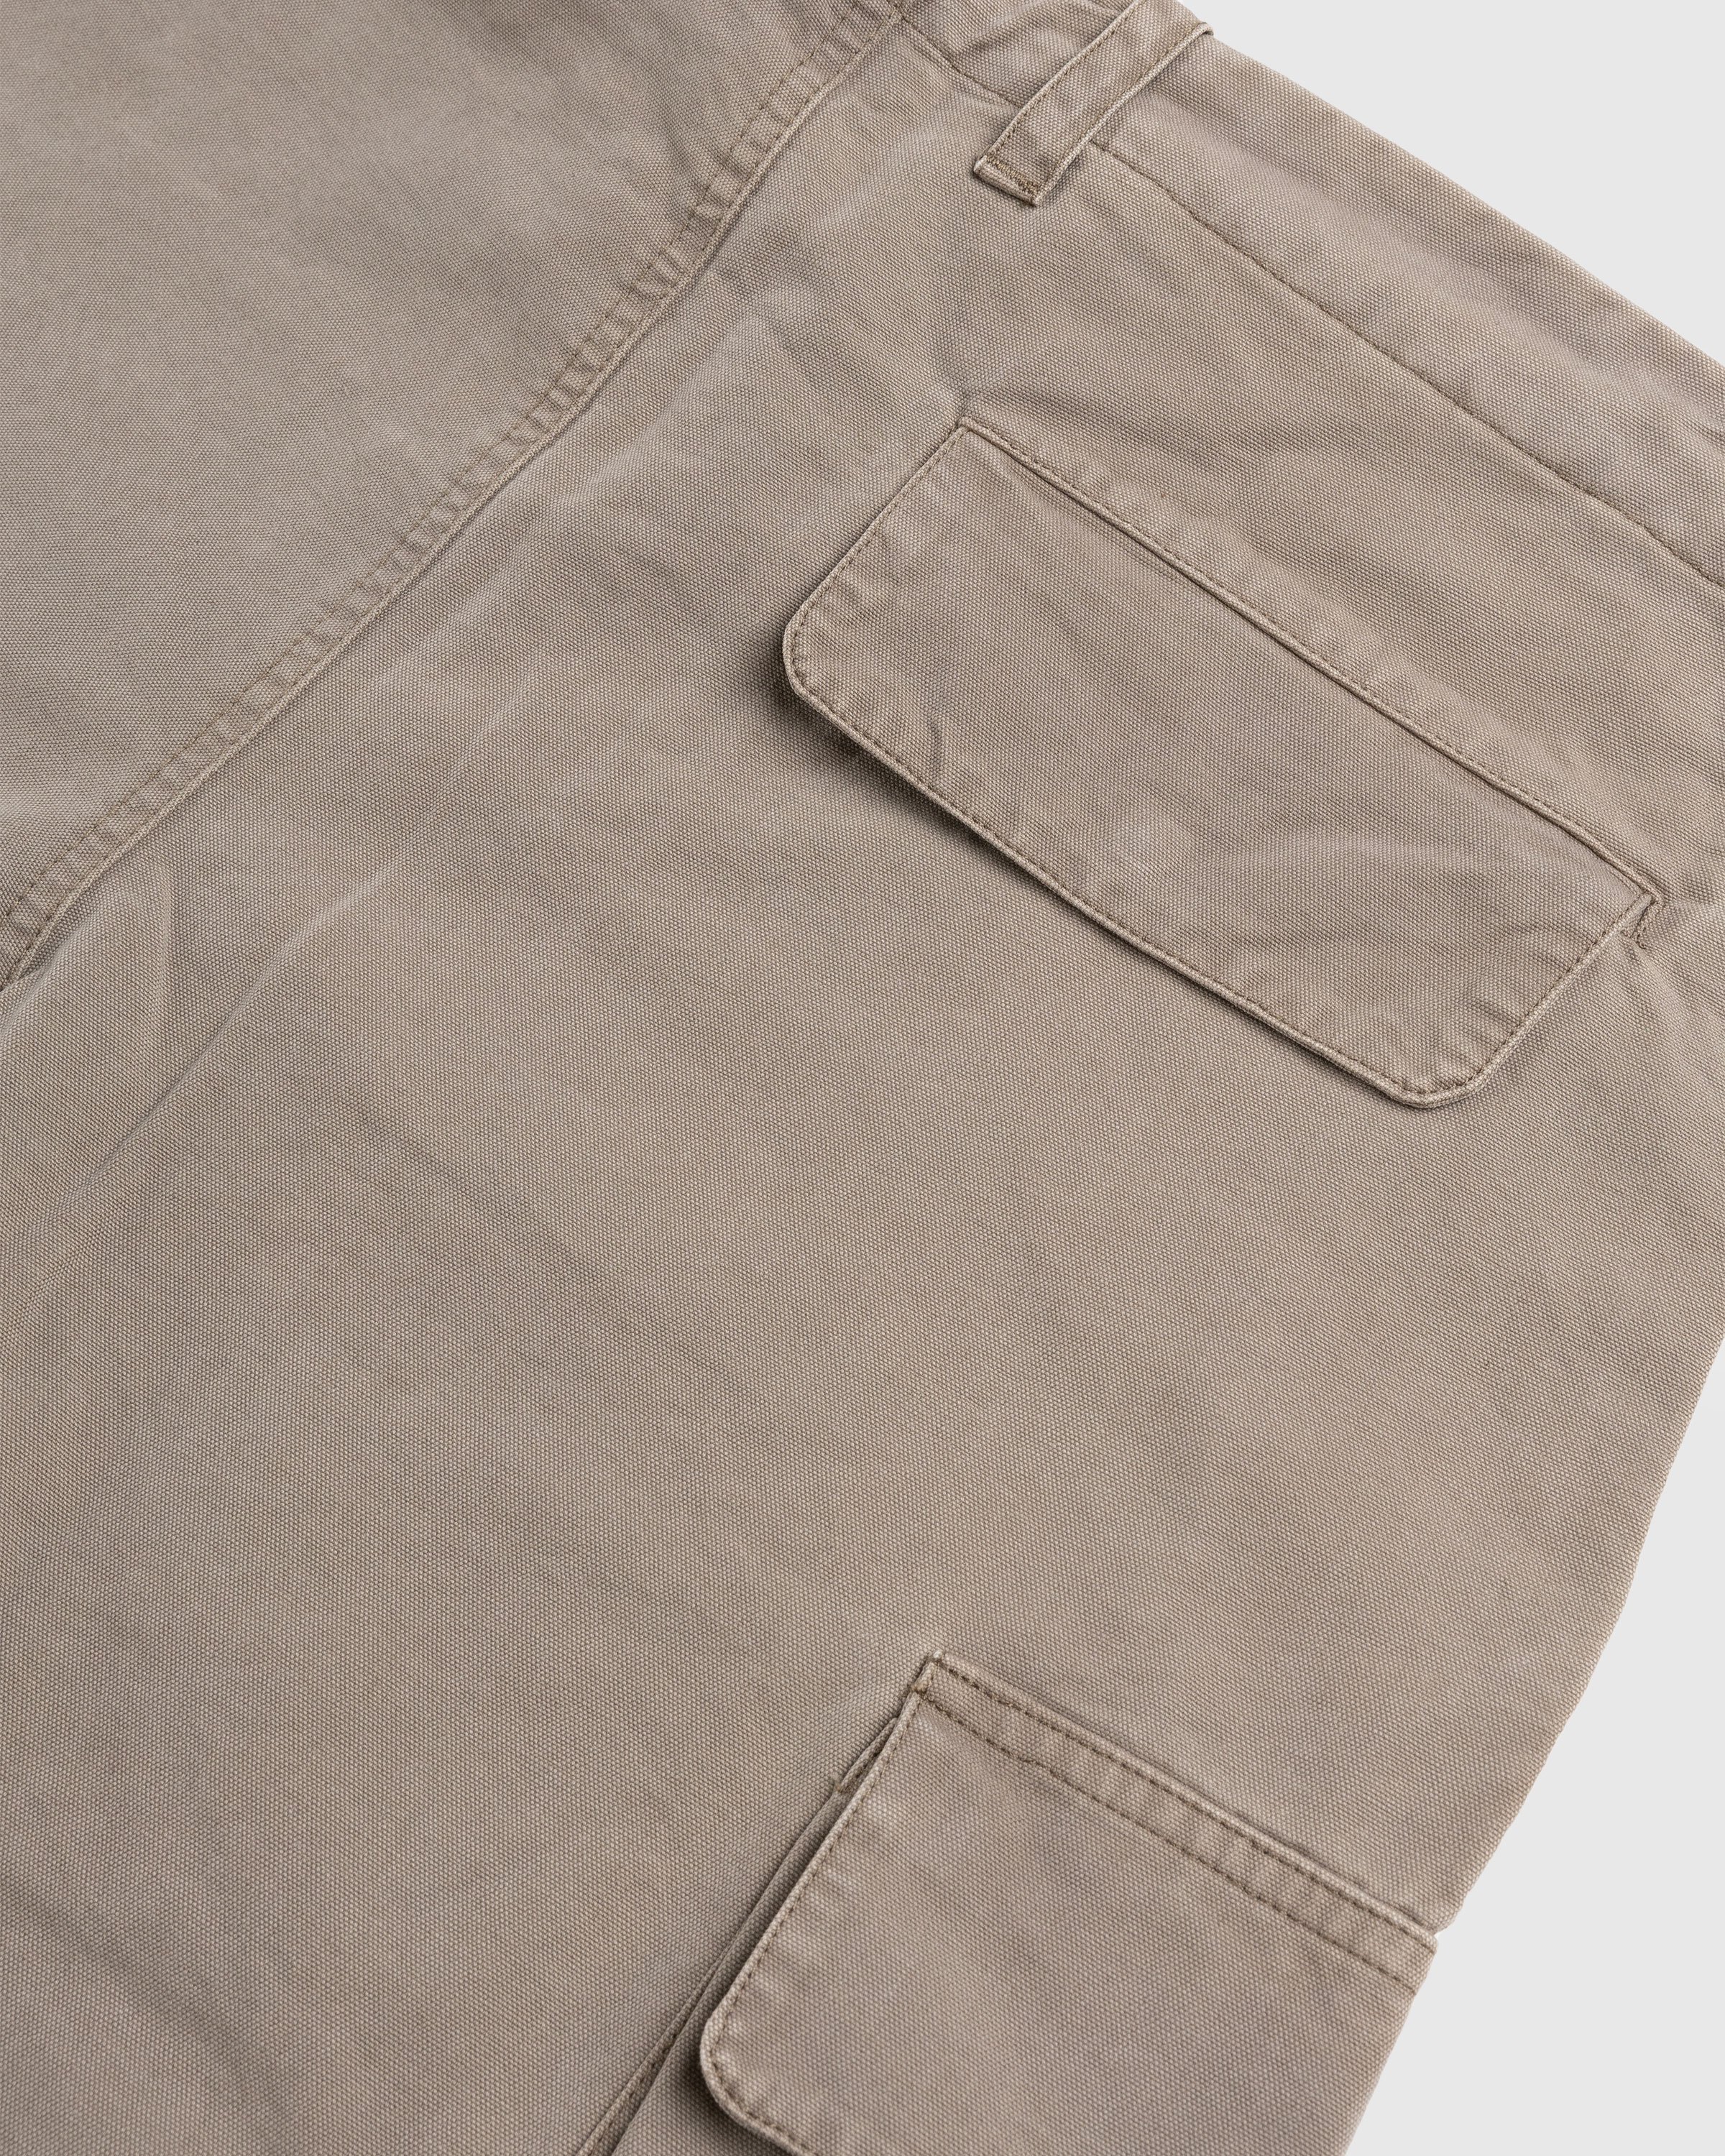 Our Legacy - MOUNT CARGO Beige - Clothing - Beige - Image 6